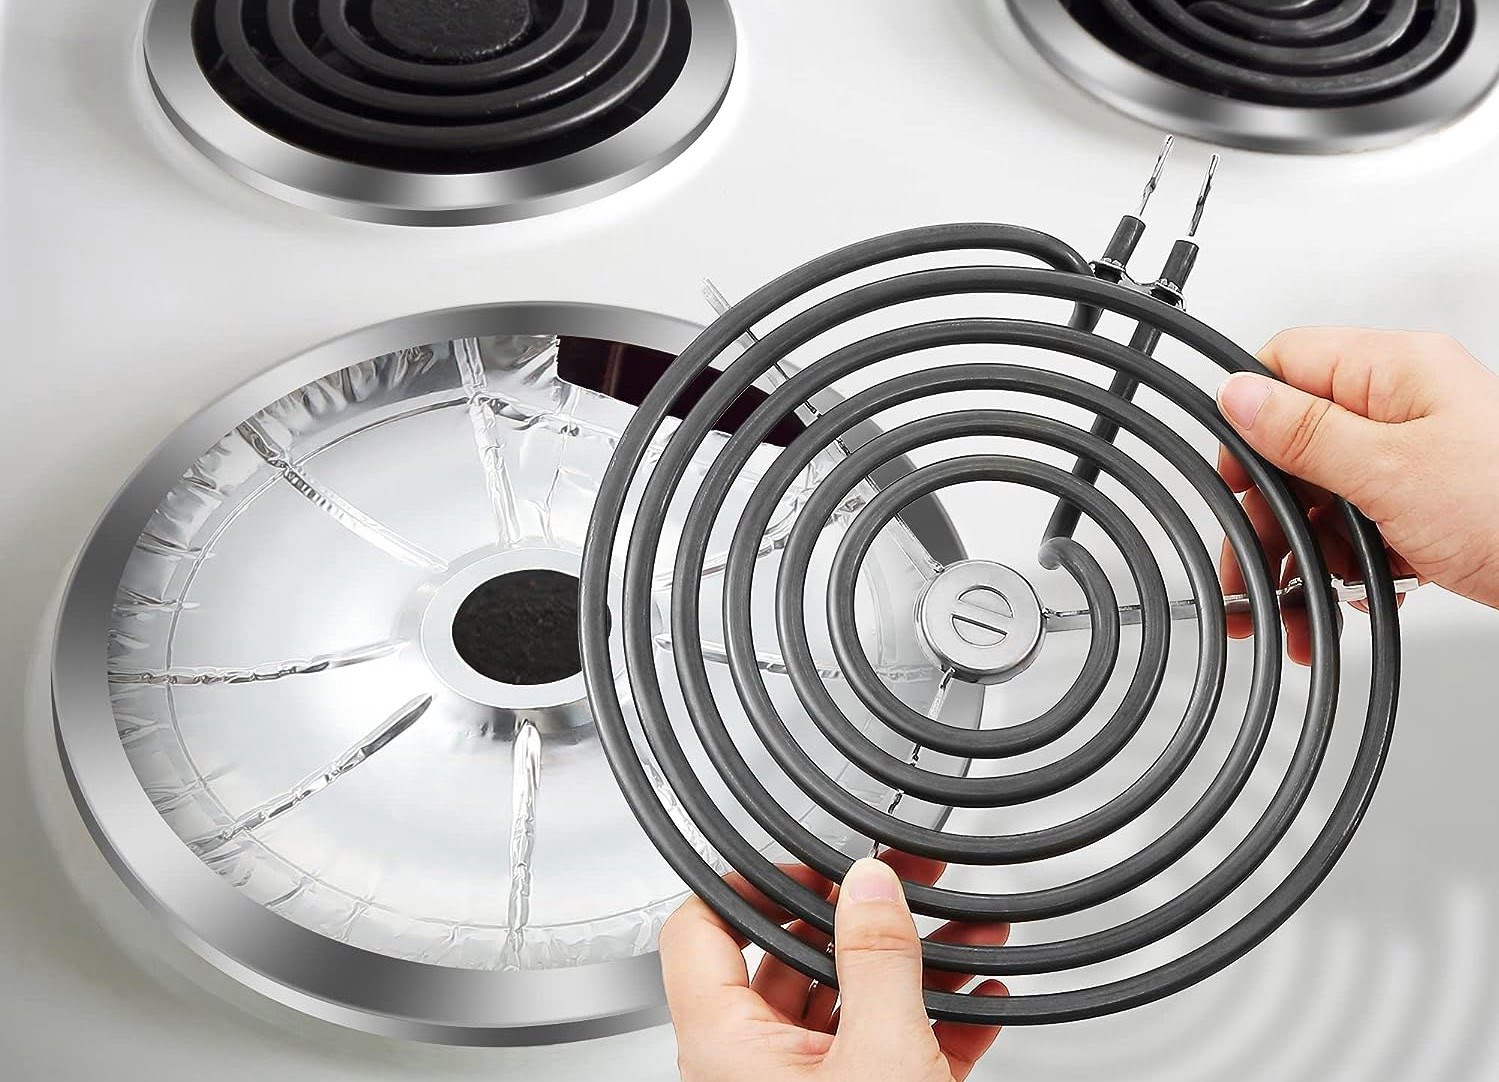 How To Put Electric Stove Burners Back On